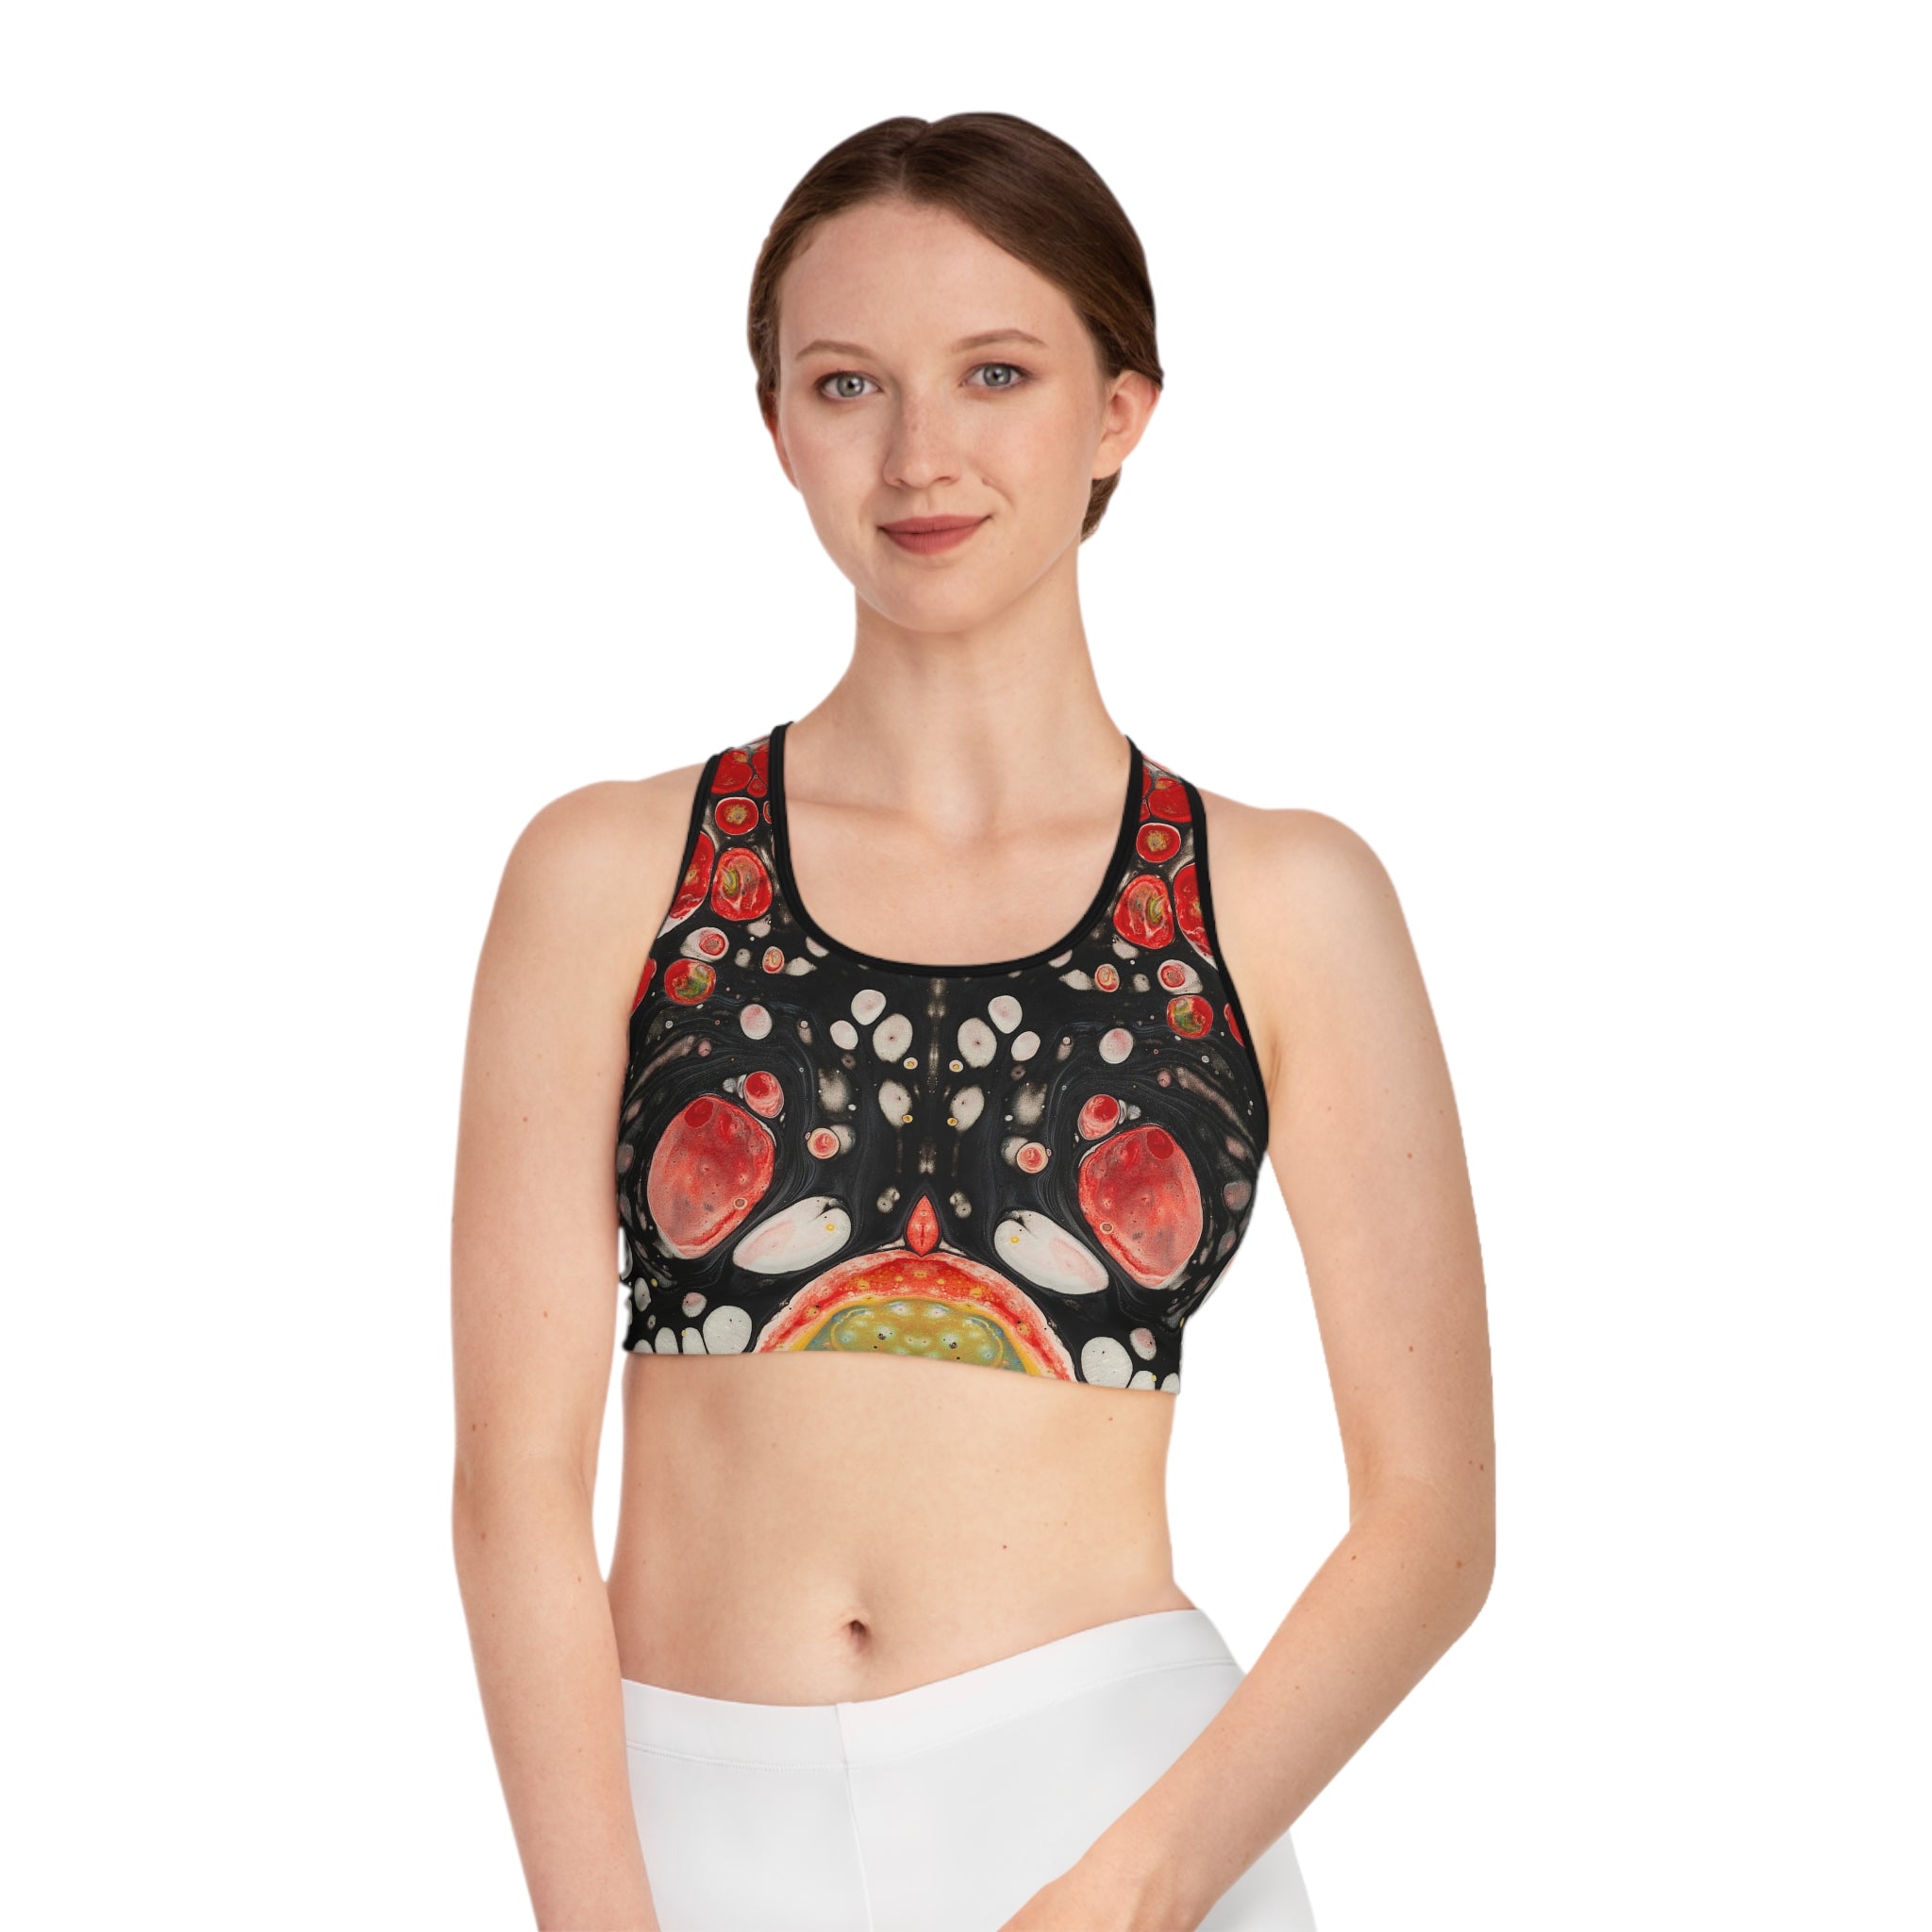 Exiting The Chaos - Women's Sports Bra